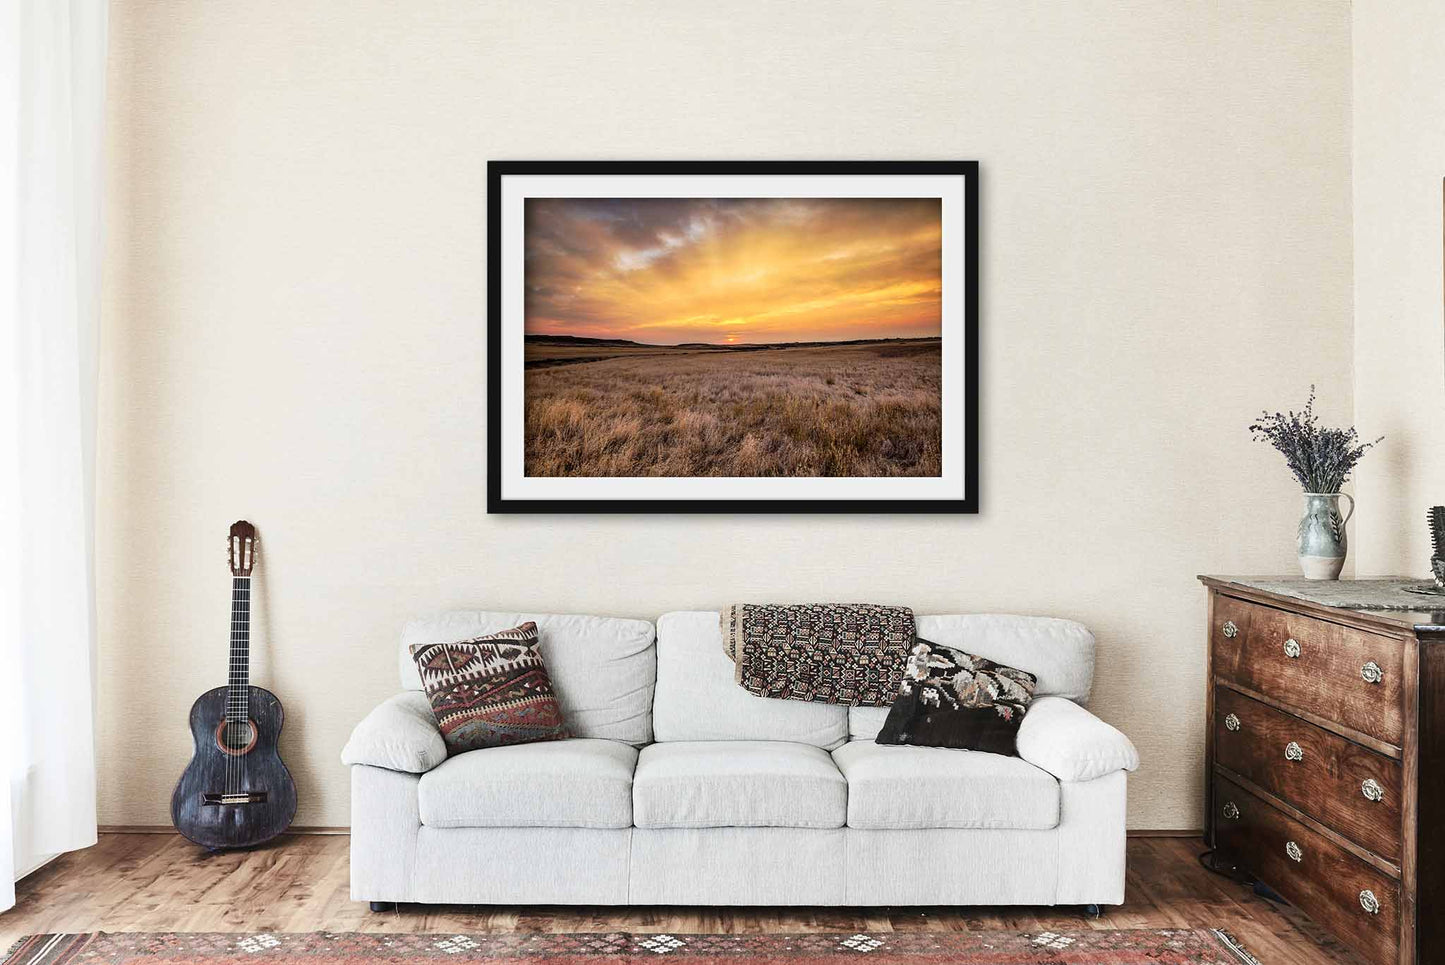 Framed Great Plains Print (Ready to Hang) Picture of Big Sky Over Prairie at Sunrise in Montana Landscape Wall Art Western Decor